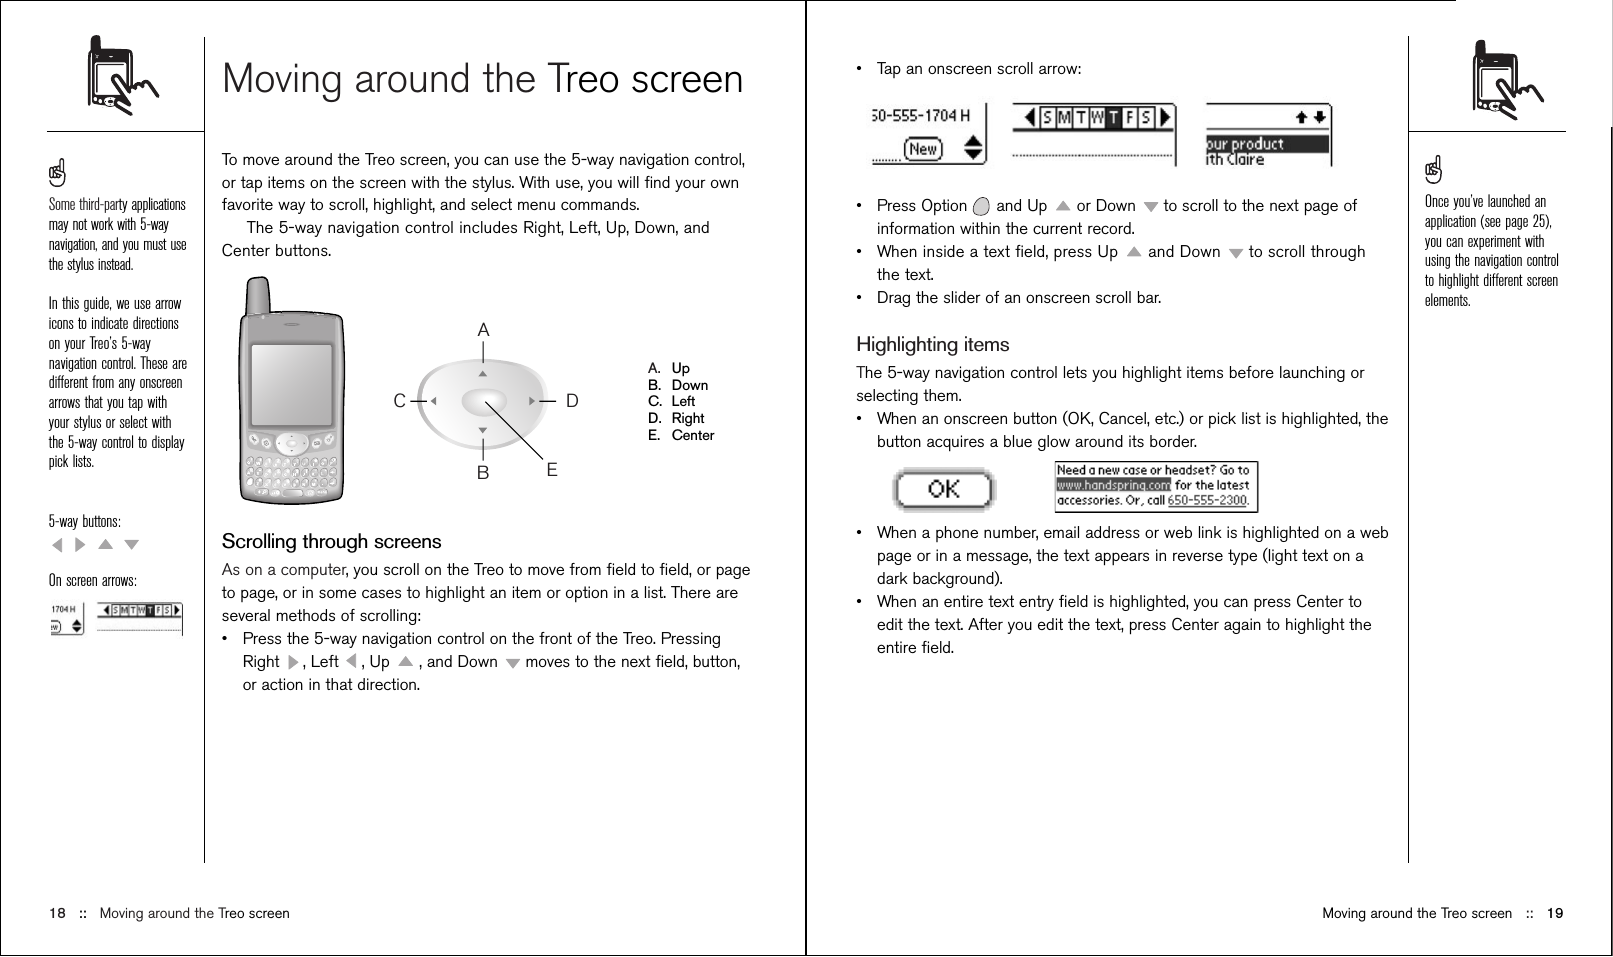 Moving around the Treo screenTo move around the Treo screen, you can use the 5-way navigation control,or tap items on the screen with the stylus. With use, you will ﬁnd your ownfavorite way to scroll, highlight, and select menu commands.The 5-way navigation control includes Right, Left, Up, Down, andCenter buttons.A. UpB. DownC. LeftD. RightE. CenterScrolling through screensAs on a computer, you scroll on the Treo to move from ﬁeld to ﬁeld, or pageto page, or in some cases to highlight an item or option in a list. There areseveral methods of scrolling:•Press the 5-way navigation control on the front of the Treo. PressingRight  , Left  , Up  , and Down  moves to the next ﬁeld, button,or action in that direction.ABCDE18 ::   Moving around the Treo screen•Tap an onscreen scroll arrow:•Press Option and Up  or Down  to scroll to the next page ofinformation within the current record. •When inside a text ﬁeld, press Up  and Down  to scroll throughthe text.•Drag the slider of an onscreen scroll bar.Highlighting itemsThe 5-way navigation control lets you highlight items before launching orselecting them. •When an onscreen button (OK, Cancel, etc.) or pick list is highlighted, thebutton acquires a blue glow around its border.•When a phone number, email address or web link is highlighted on a webpage or in a message, the text appears in reverse type (light text on adark background).•When an entire text entry ﬁeld is highlighted, you can press Center toedit the text. After you edit the text, press Center again to highlight theentire ﬁeld.Moving around the Treo screen ::   19Some third-party applicationsmay not work with 5-waynavigation, and you must usethe stylus instead.In this guide, we use arrowicons to indicate directionson your Treo’s 5-waynavigation control. These aredifferent from any onscreenarrows that you tap withyour stylus or select withthe 5-way control to displaypick lists. 5-way buttons:On screen arrows:Once you’ve launched anapplication (see page 25),you can experiment withusing the navigation controlto highlight different screenelements.